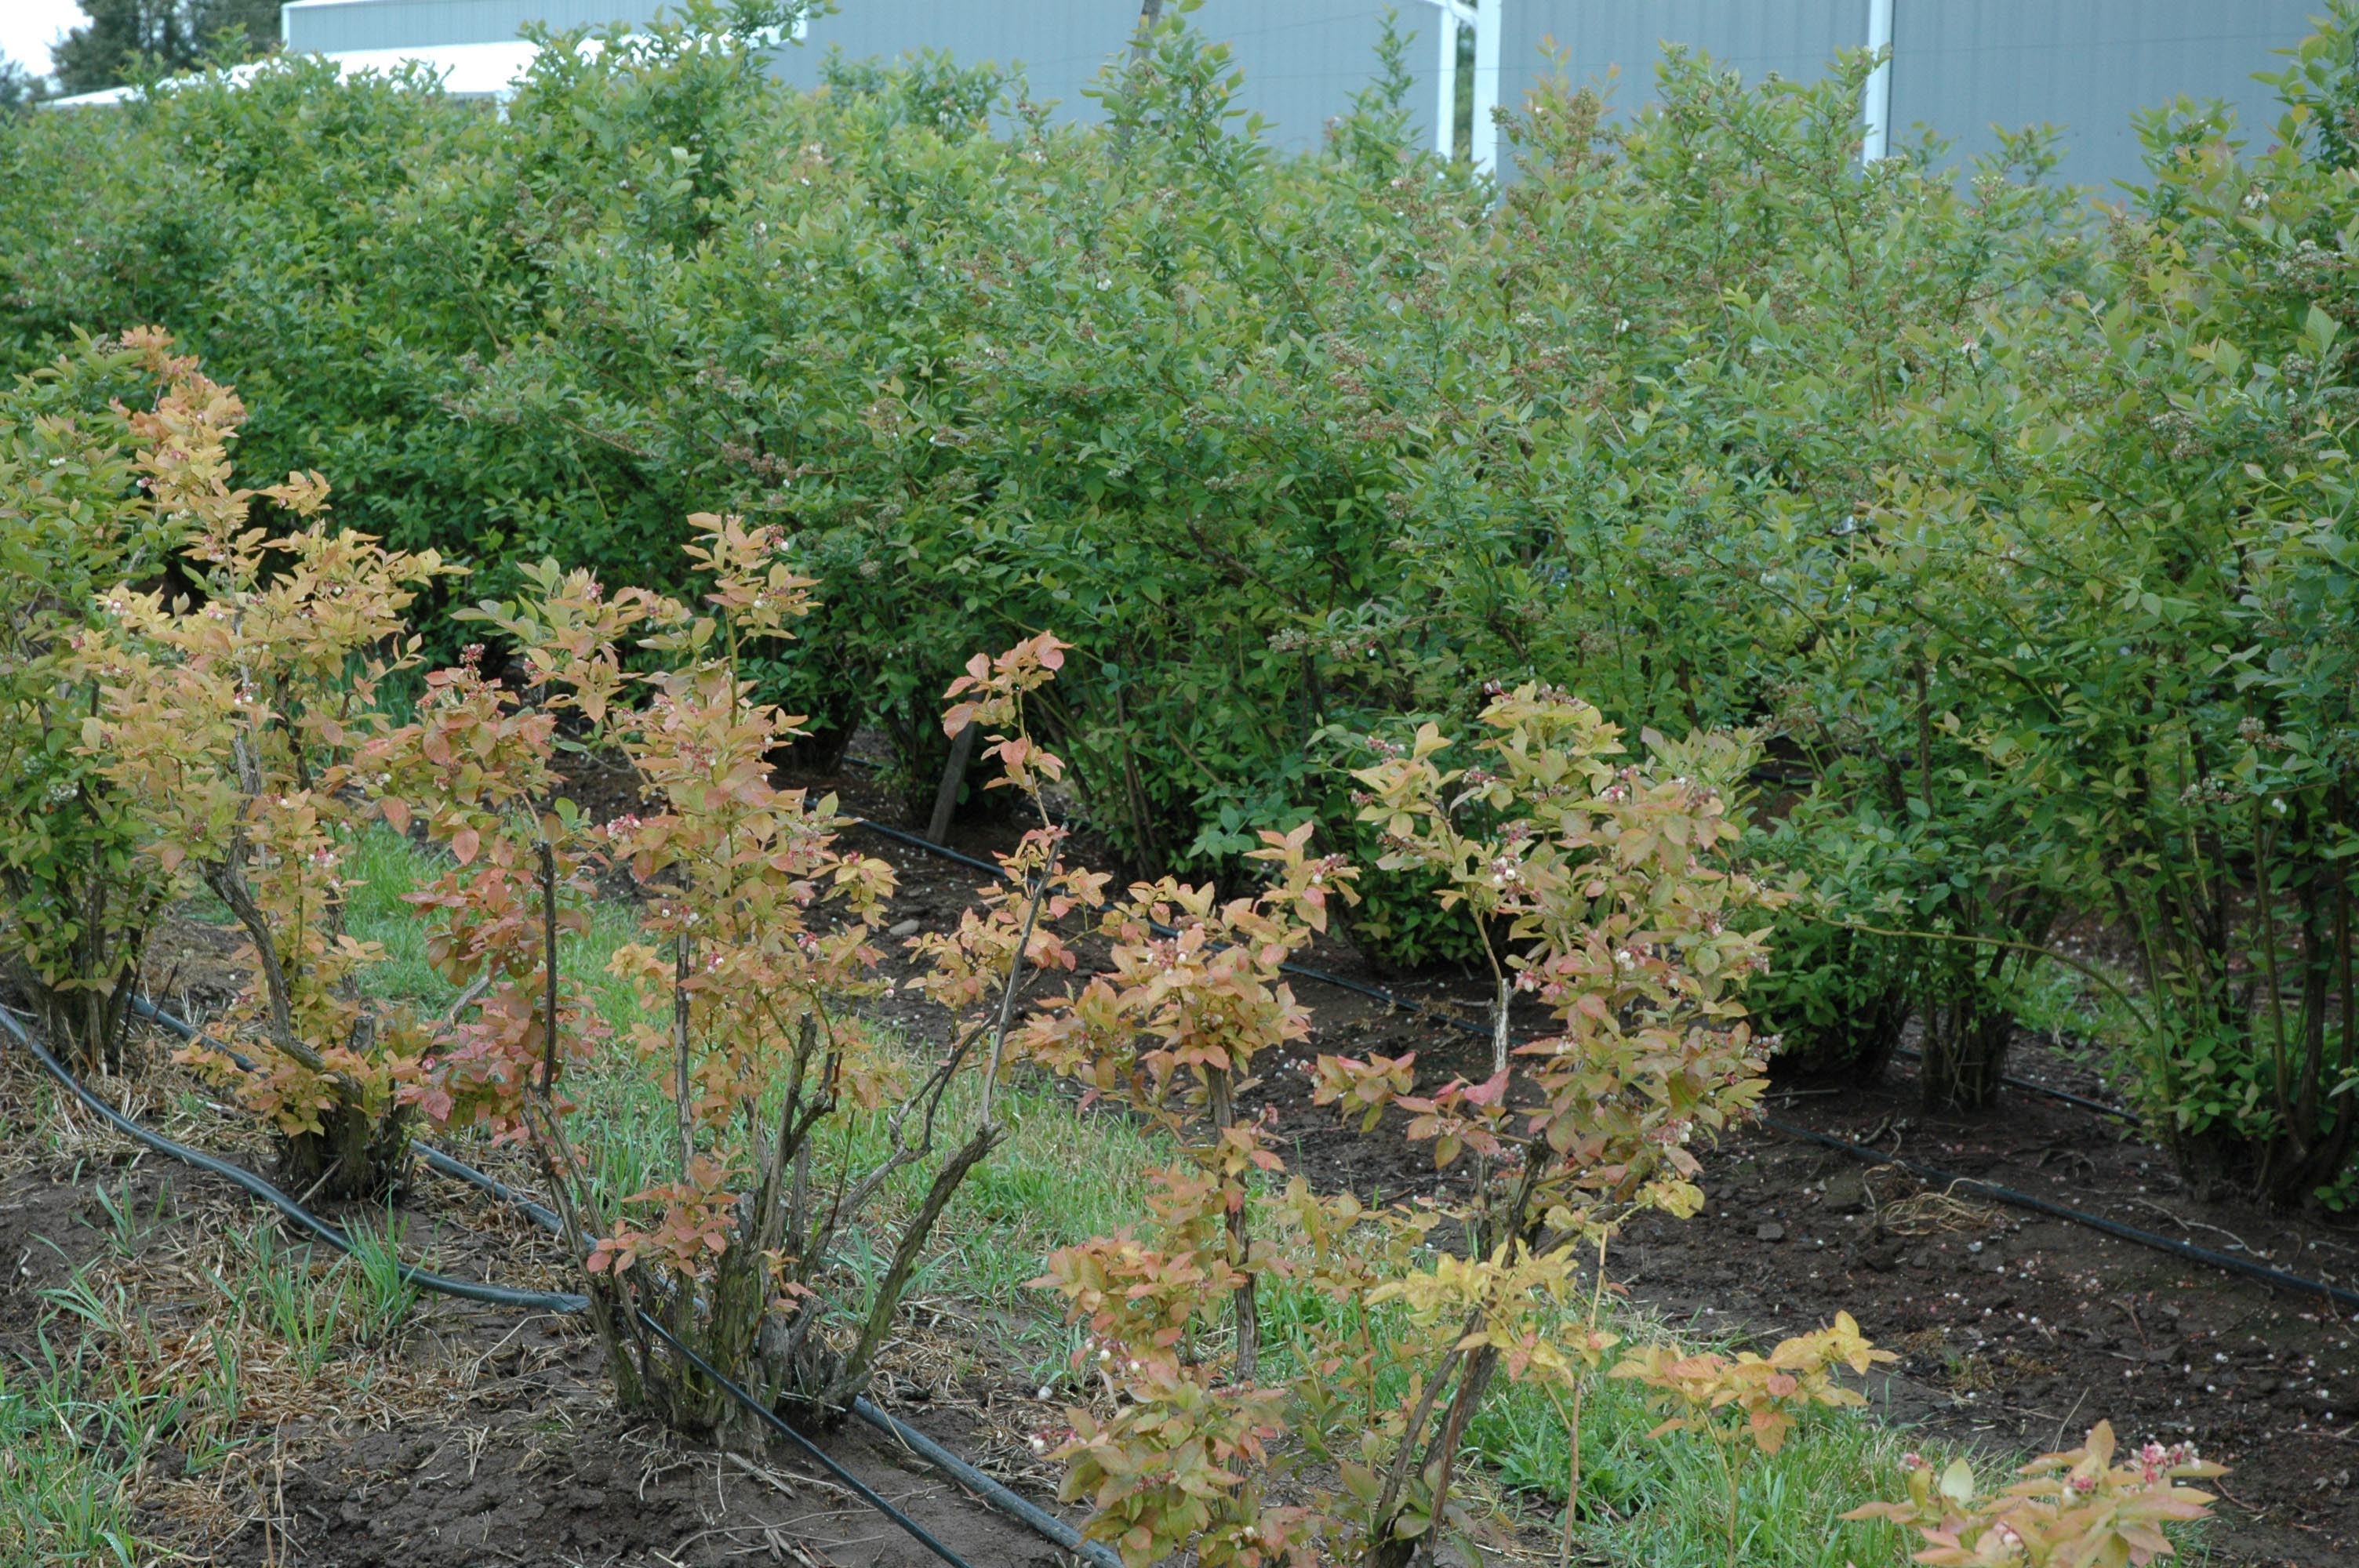 Highbush blueberries that are stunted and brown in colour in front of plants that are green, lush and full size